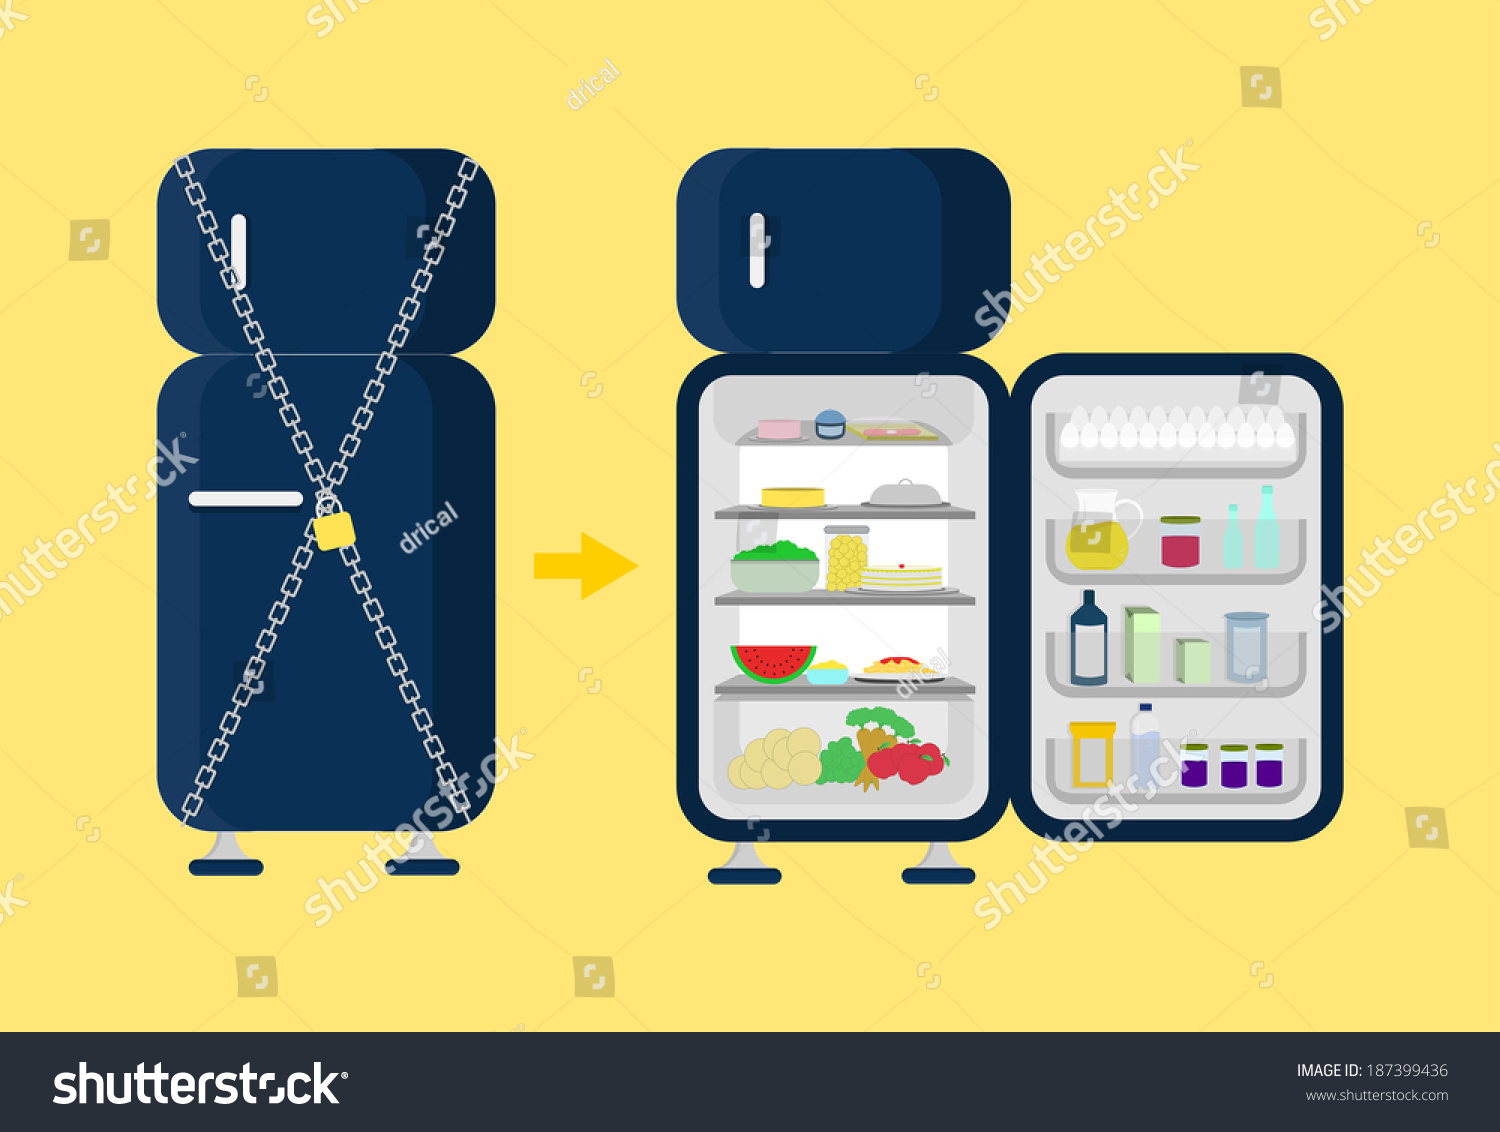 Locked and opened the fridge. Refrigerator locked with chain and padlock and beside open and full refrigerator food as vegetables, cake, juice, fruit, pasta. #187399436